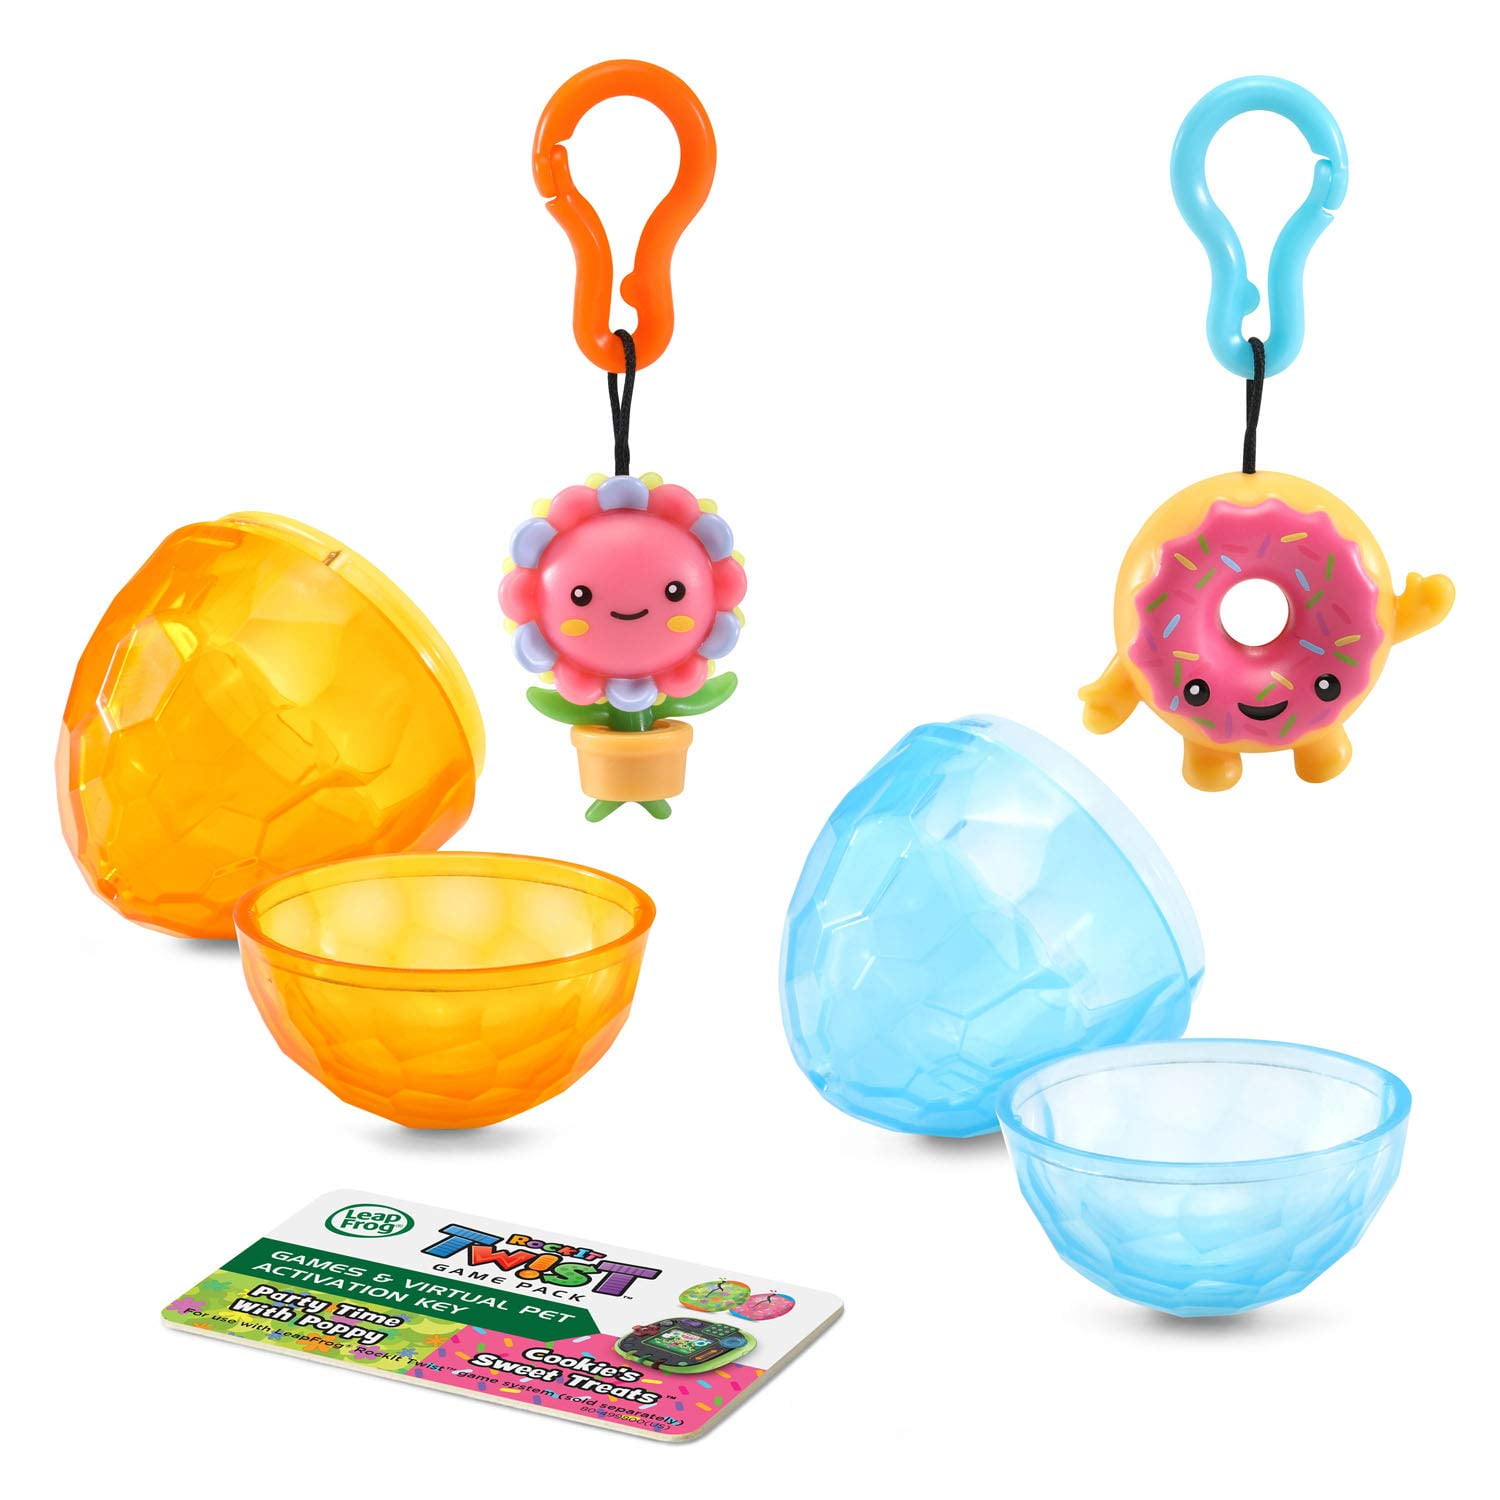 Details about   NEW Leap Frog RockIt Twist Game Pk Trolls Party Time Poppy Cookie's Sweet Treats 